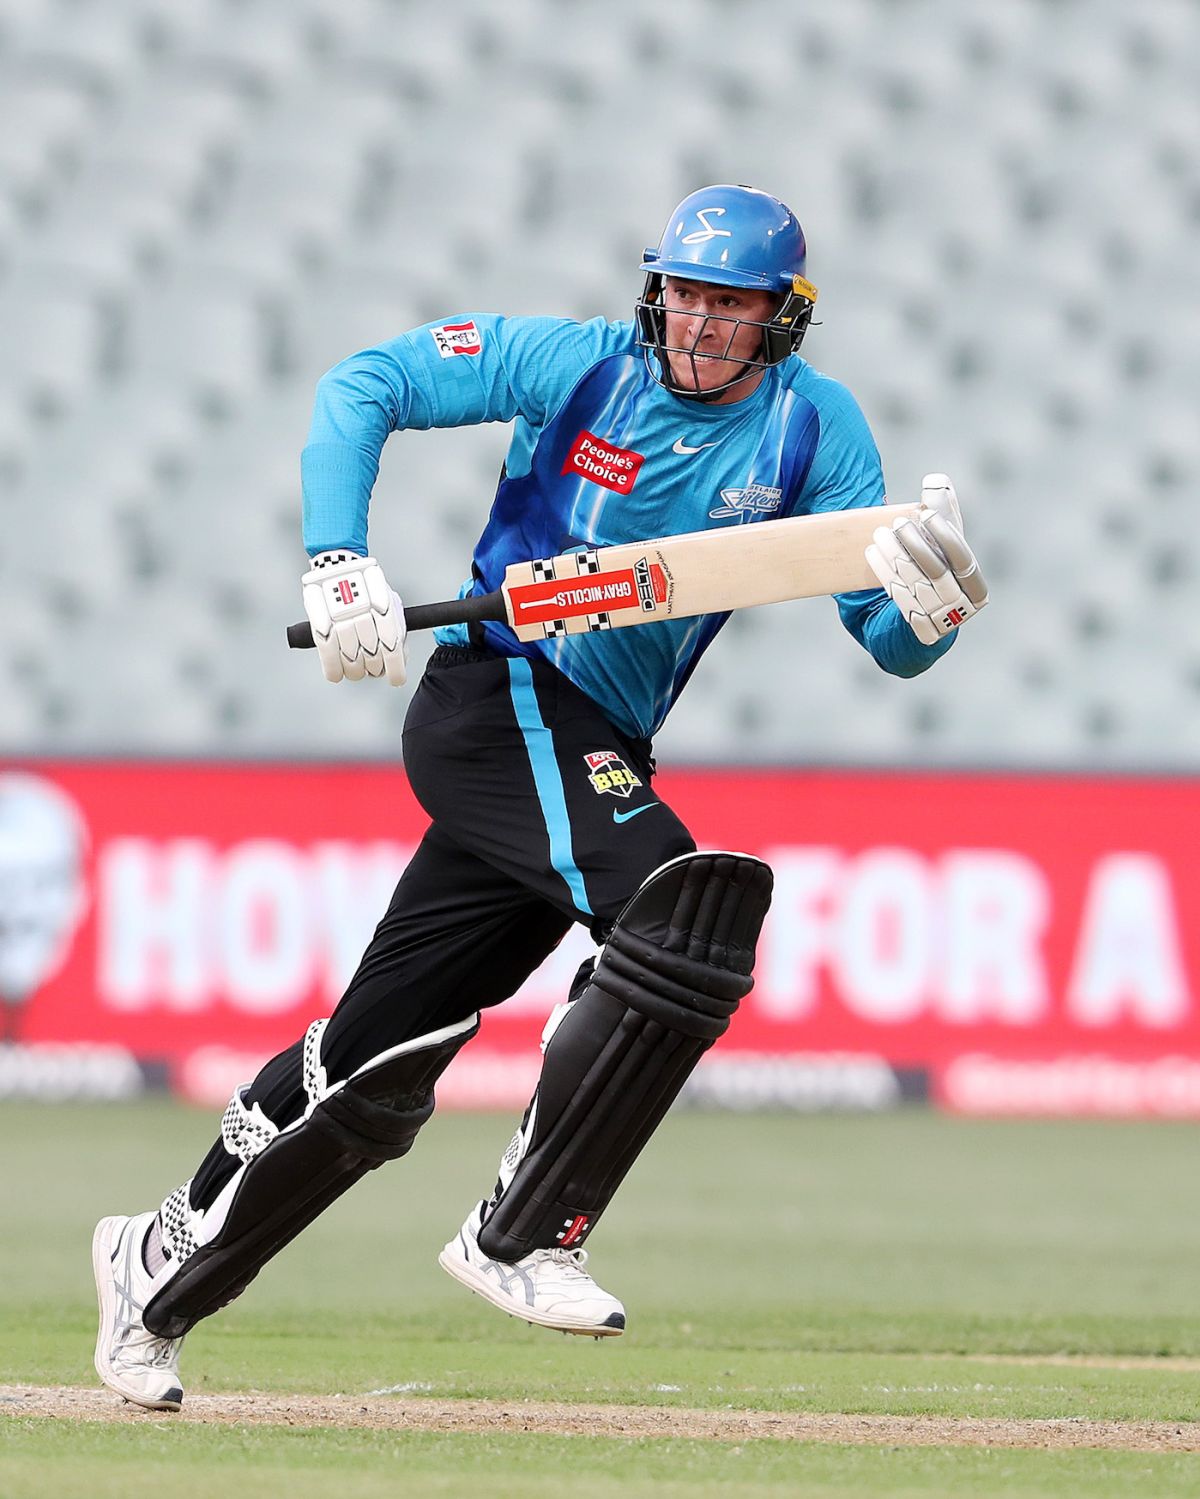 Matt Renshaw sets off for a run after playing to the leg side, Adelaide Strikers vs Sydney Strikers, BBL 2021-22, Adelaide, January 17, 2022